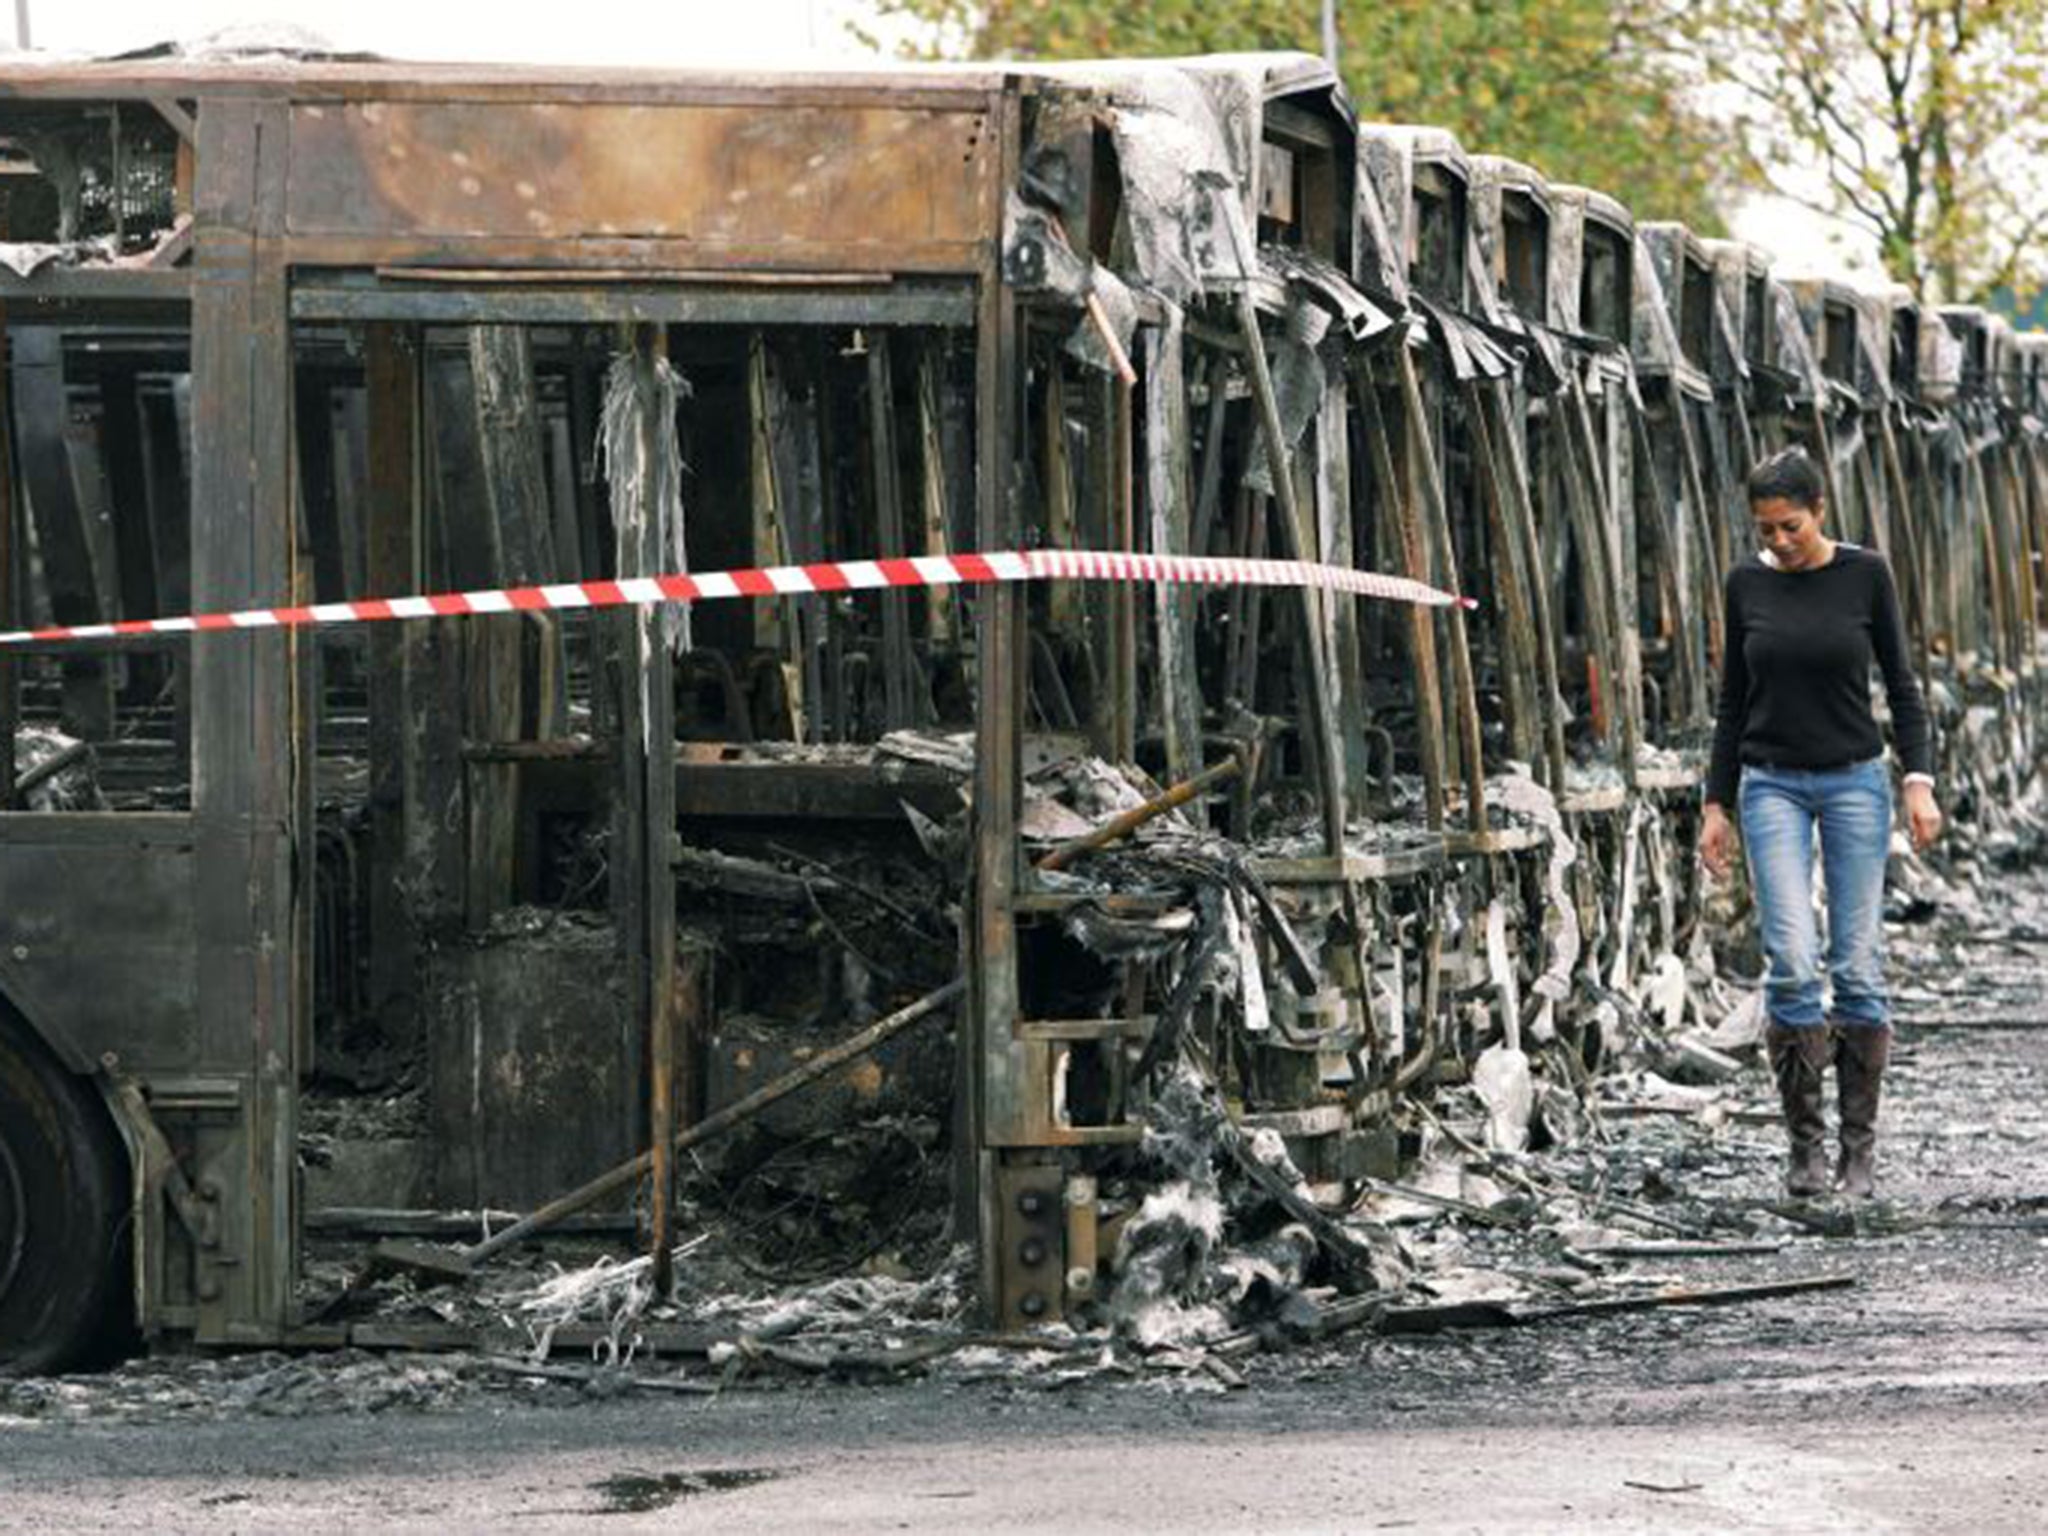 In the Paris suburb of Trappes, 27 buses went up in flames in the second week of rioting